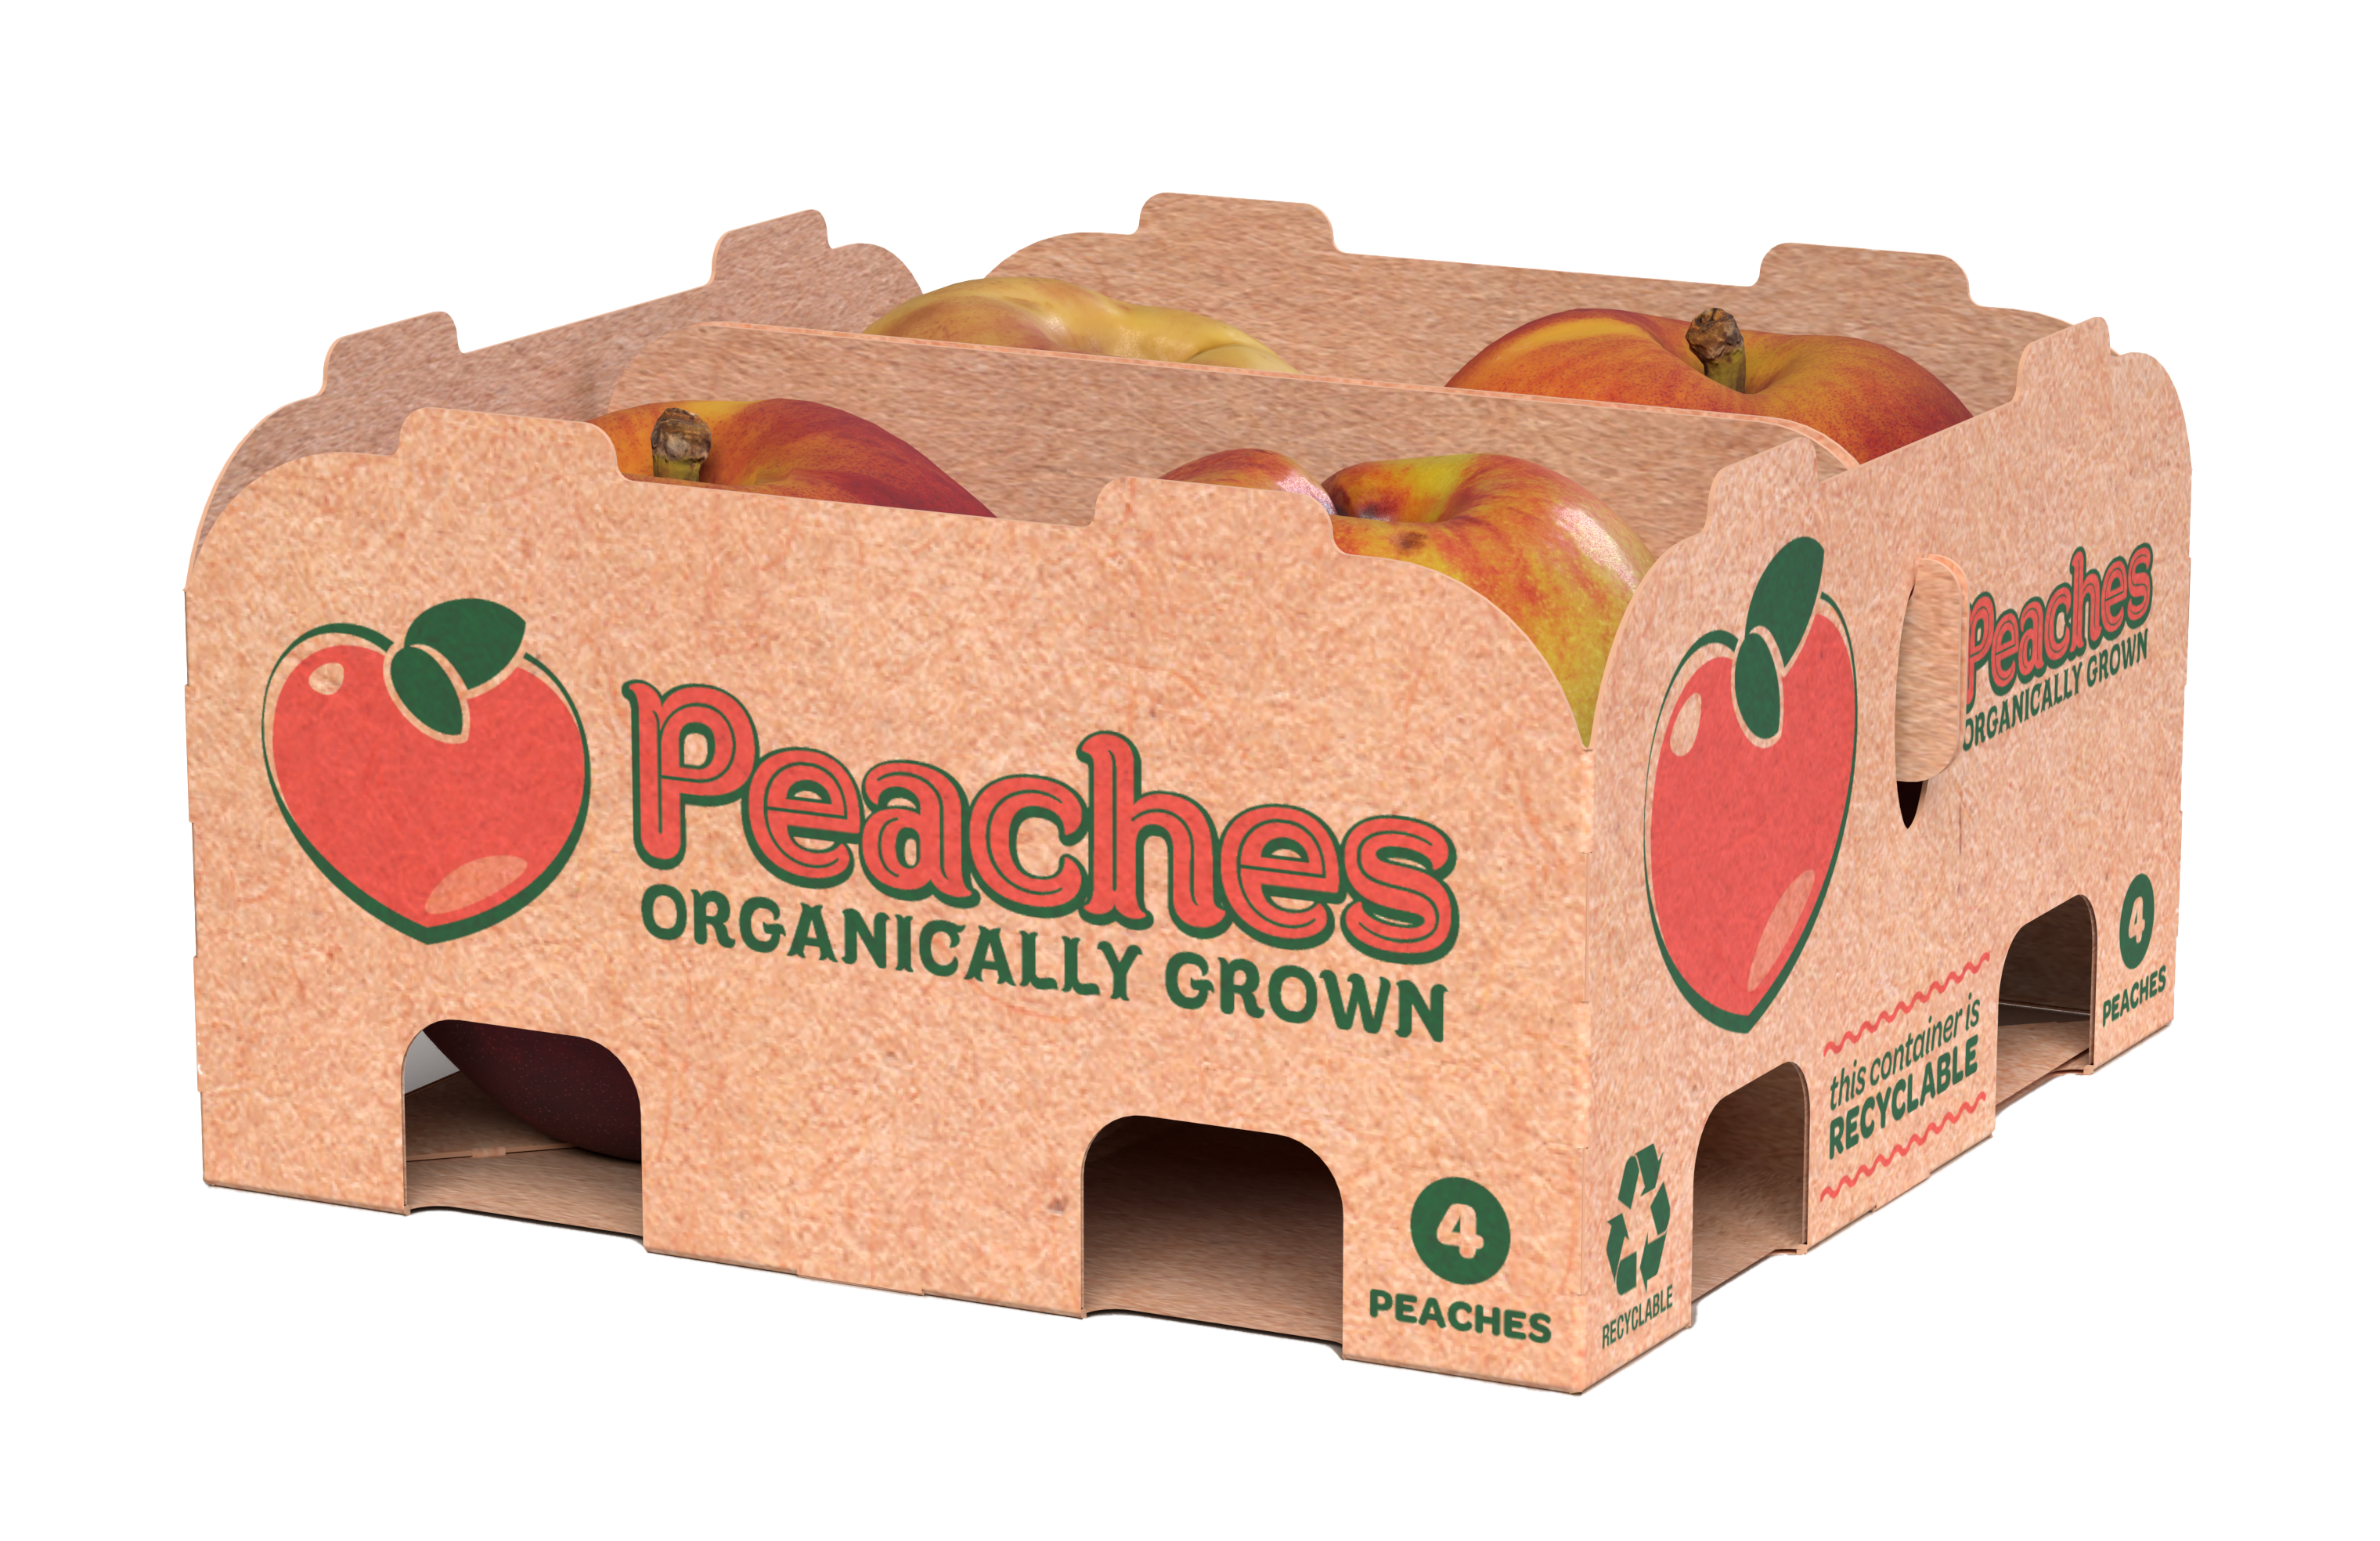 Peaches packaged in a recyclable paper package